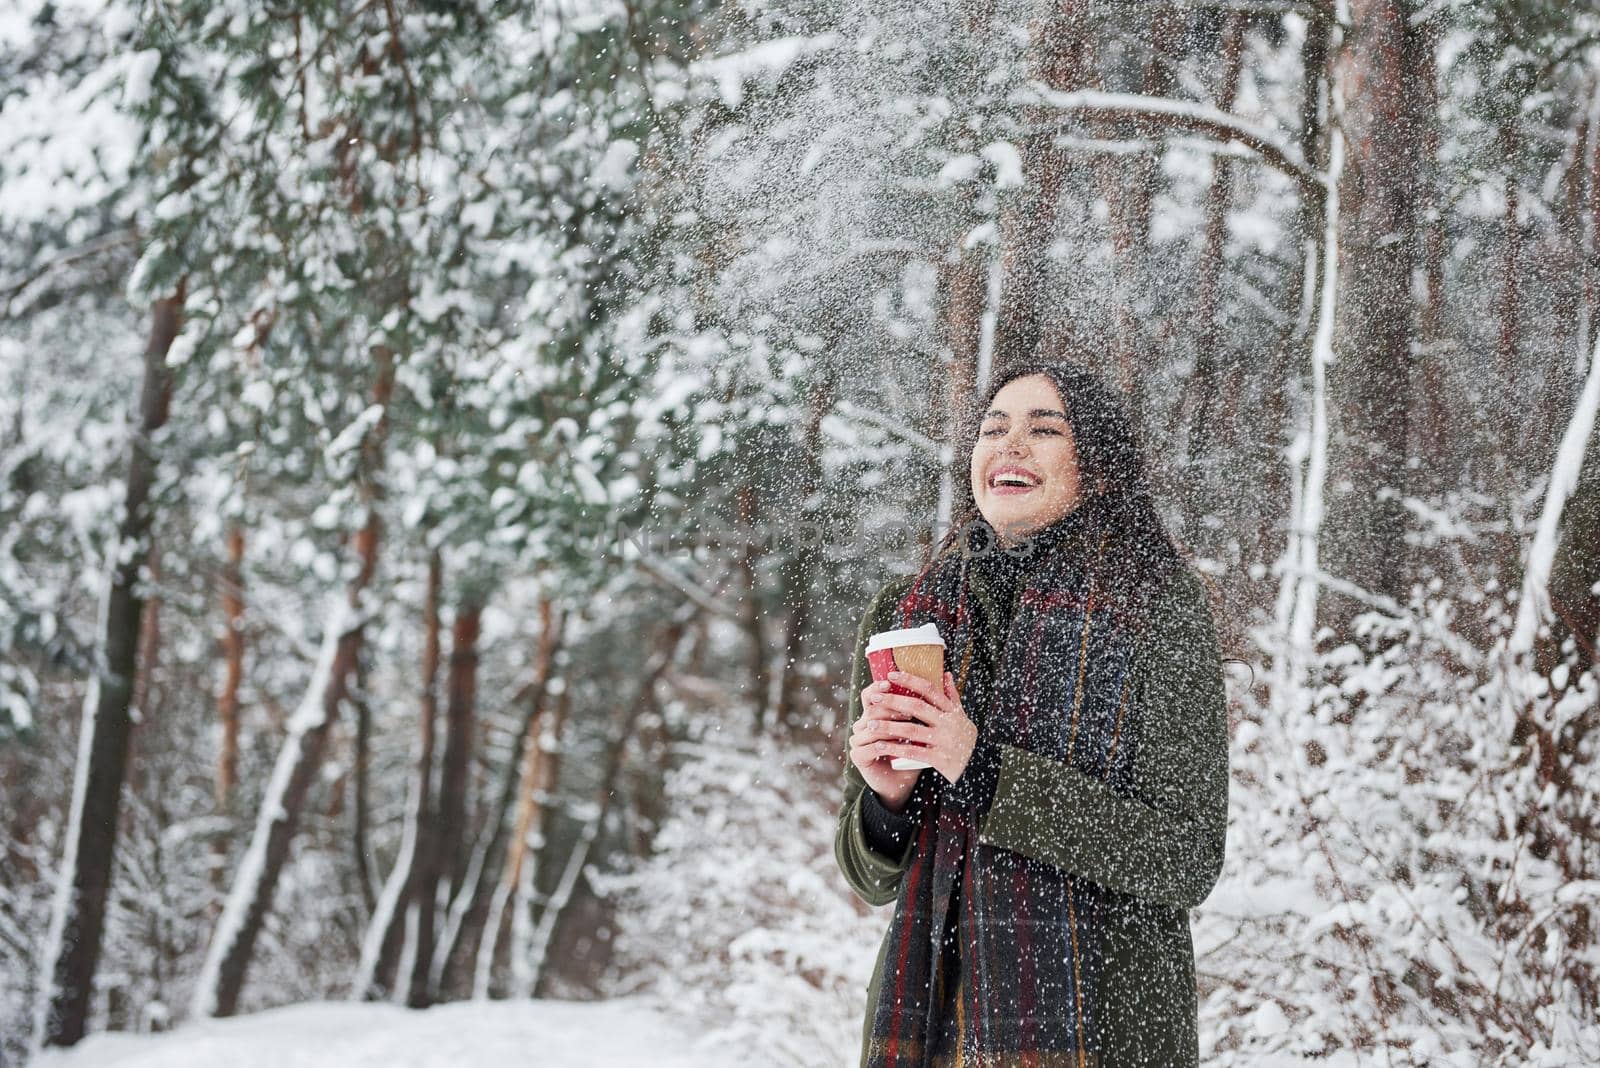 Smiles when snow falling from the trees on her. Girl in warm clothes with cup of coffee have a walk in the winter forest.